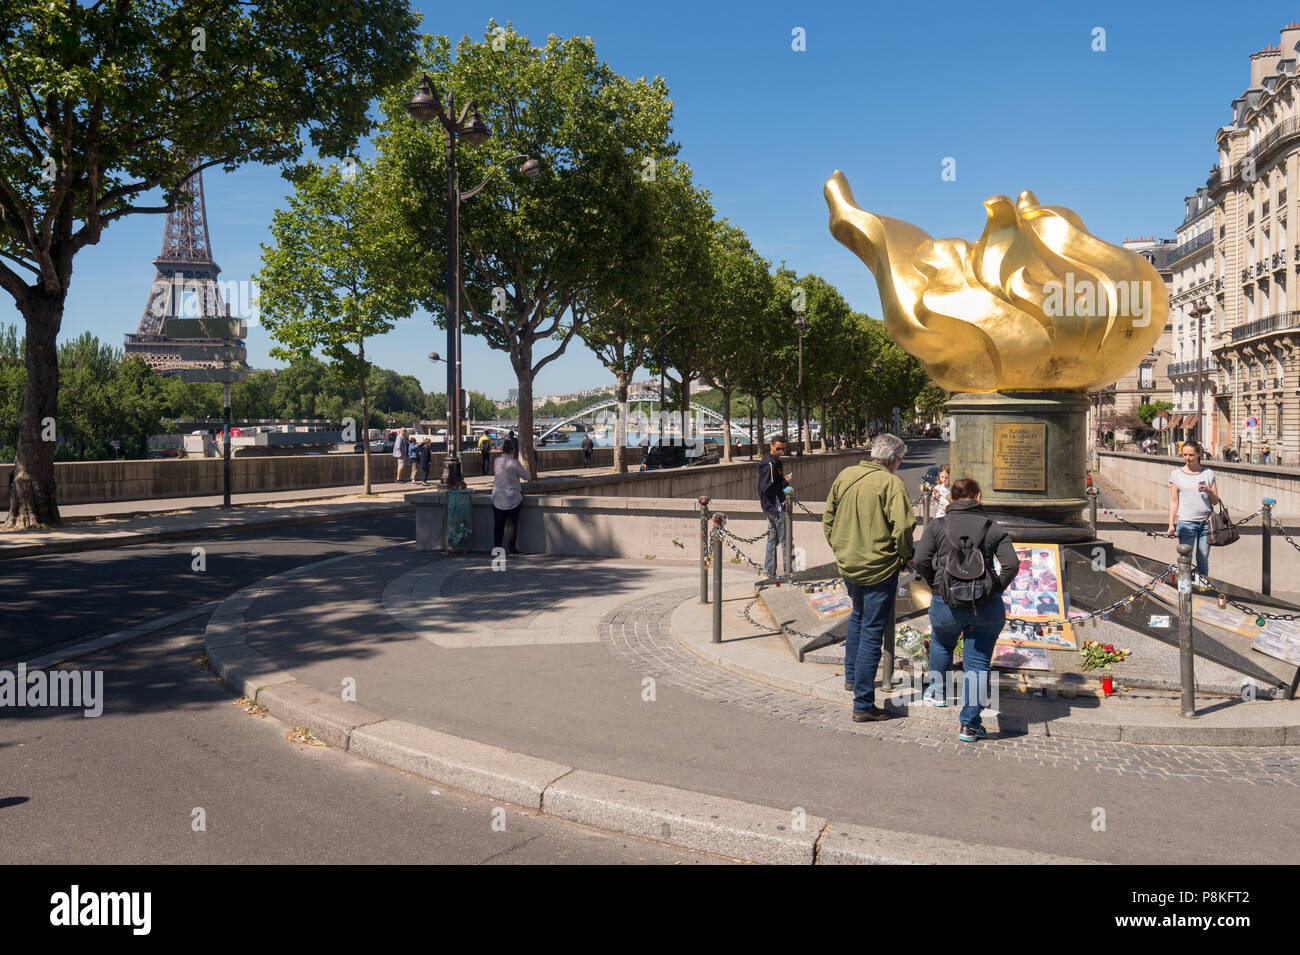 Paris, France - 23 June 2018: Tourists gather in front of the flame of freedom, an unofficial memorial for Diana, princess of Wales. Stock Photo